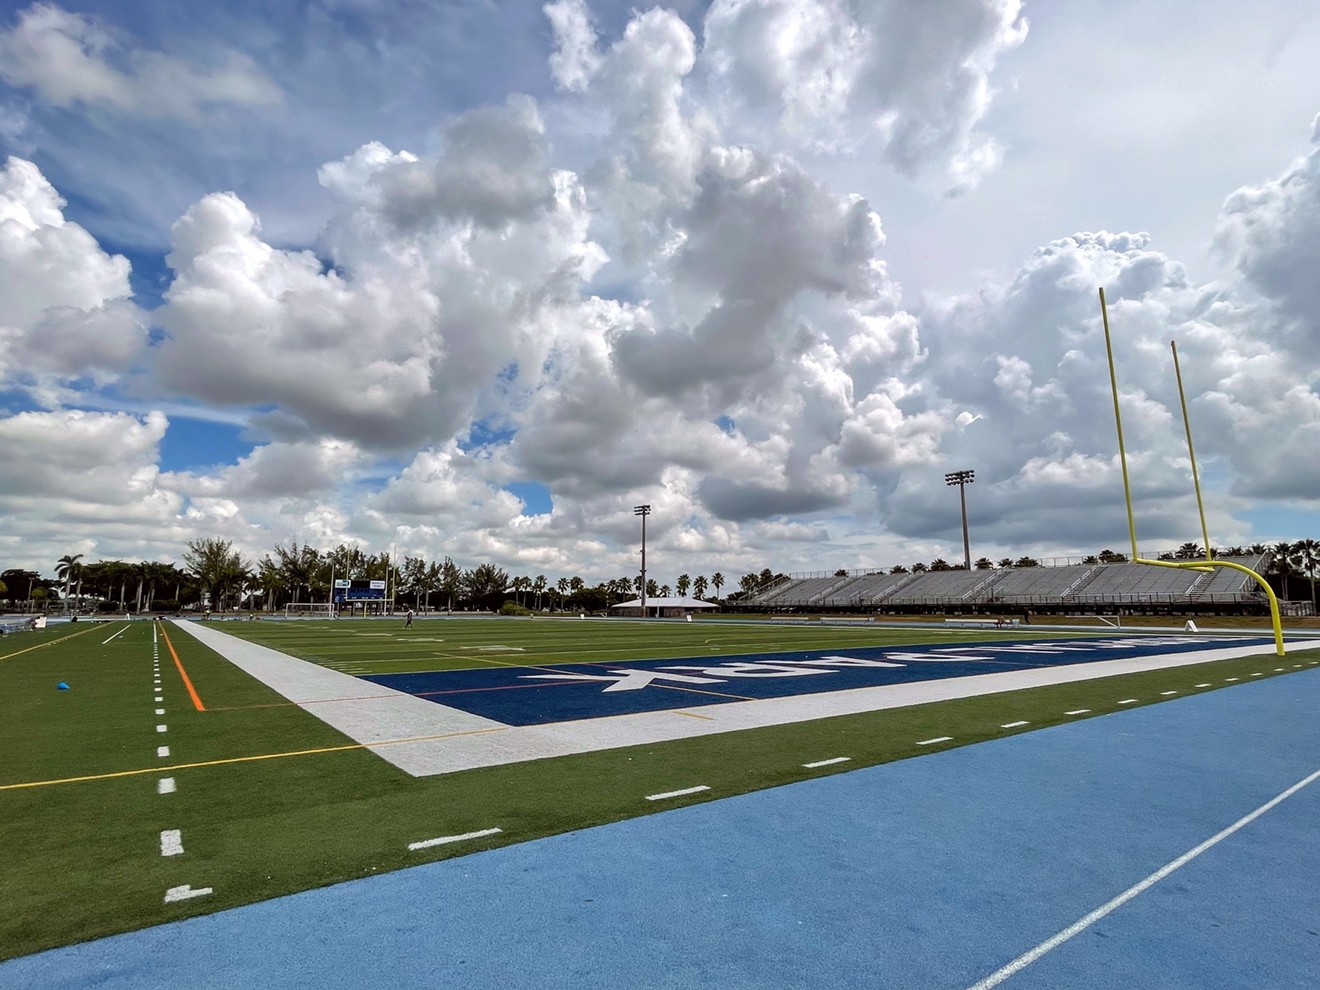 Tropical Park's current sports complex is used by several local high school football teams and athletic programs. Attorney John Ruiz is proposing a massive development project at Tropical Park that would include a 60,000-seat new stadium for the University of Miami football team.